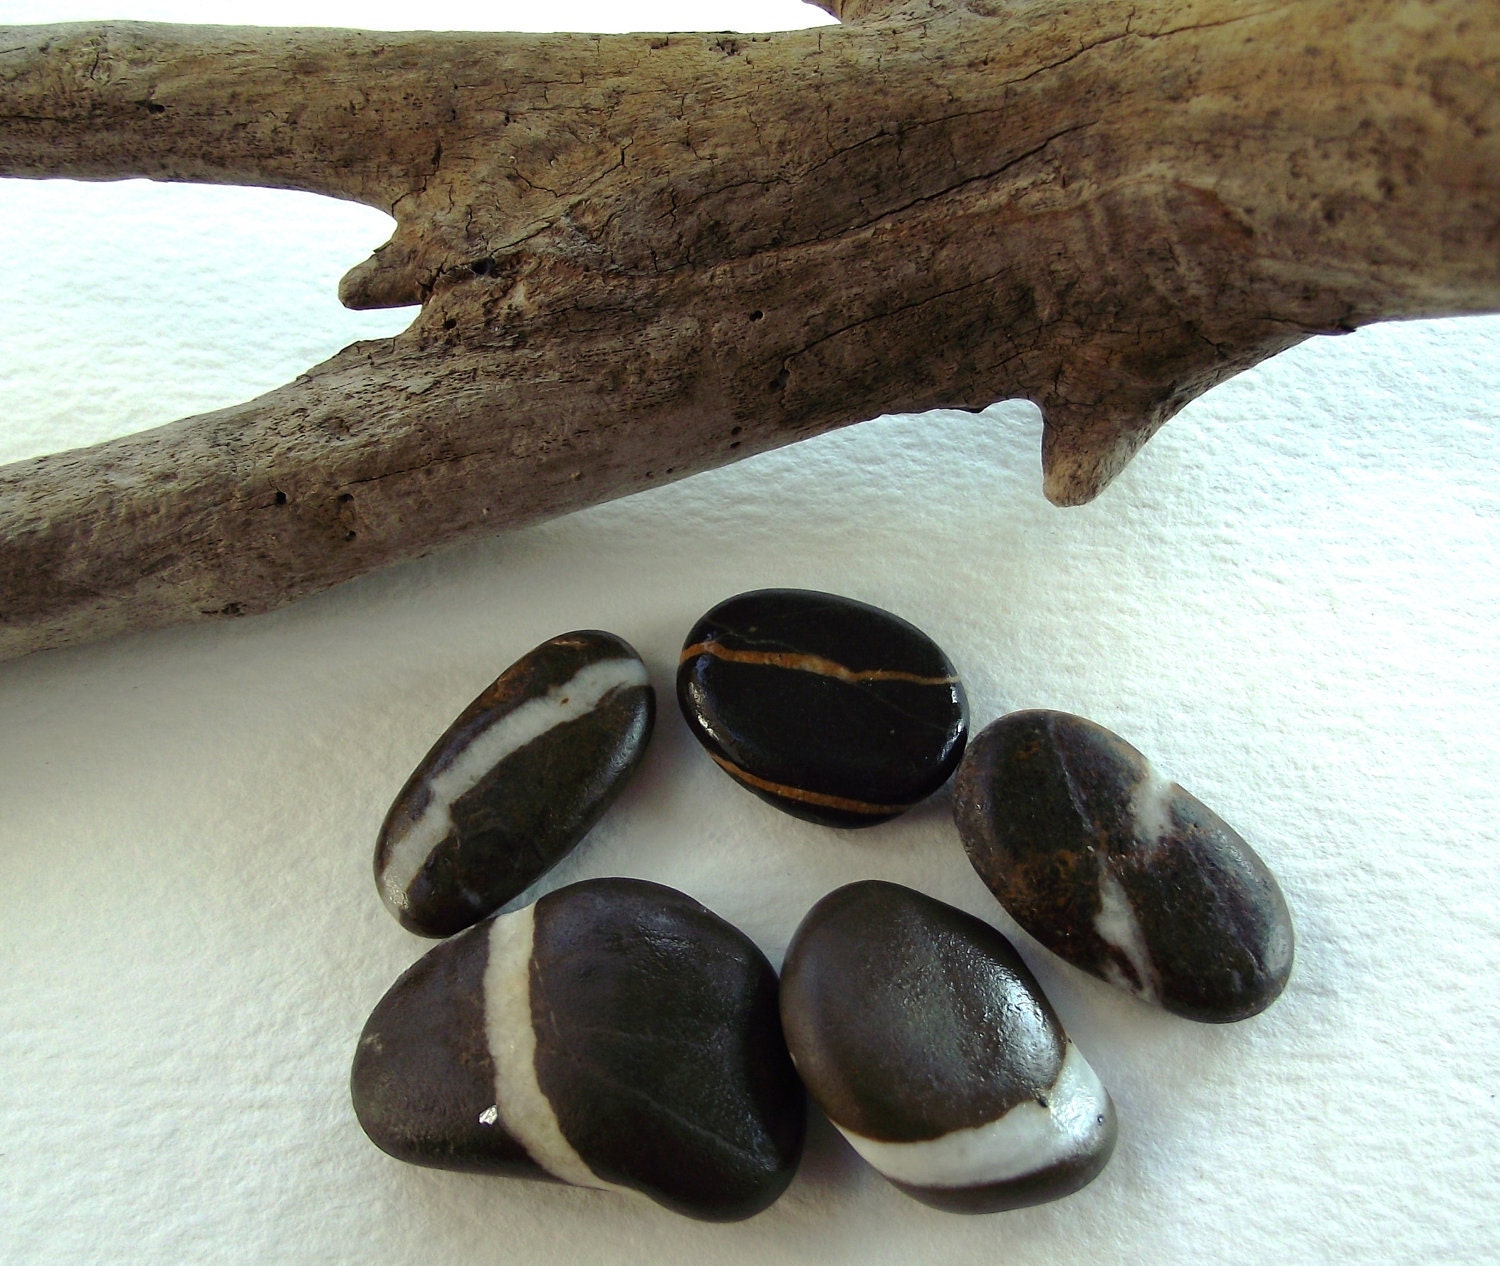 Black rocks. Smooth striped stones.5 Black pebbles by oceangifts